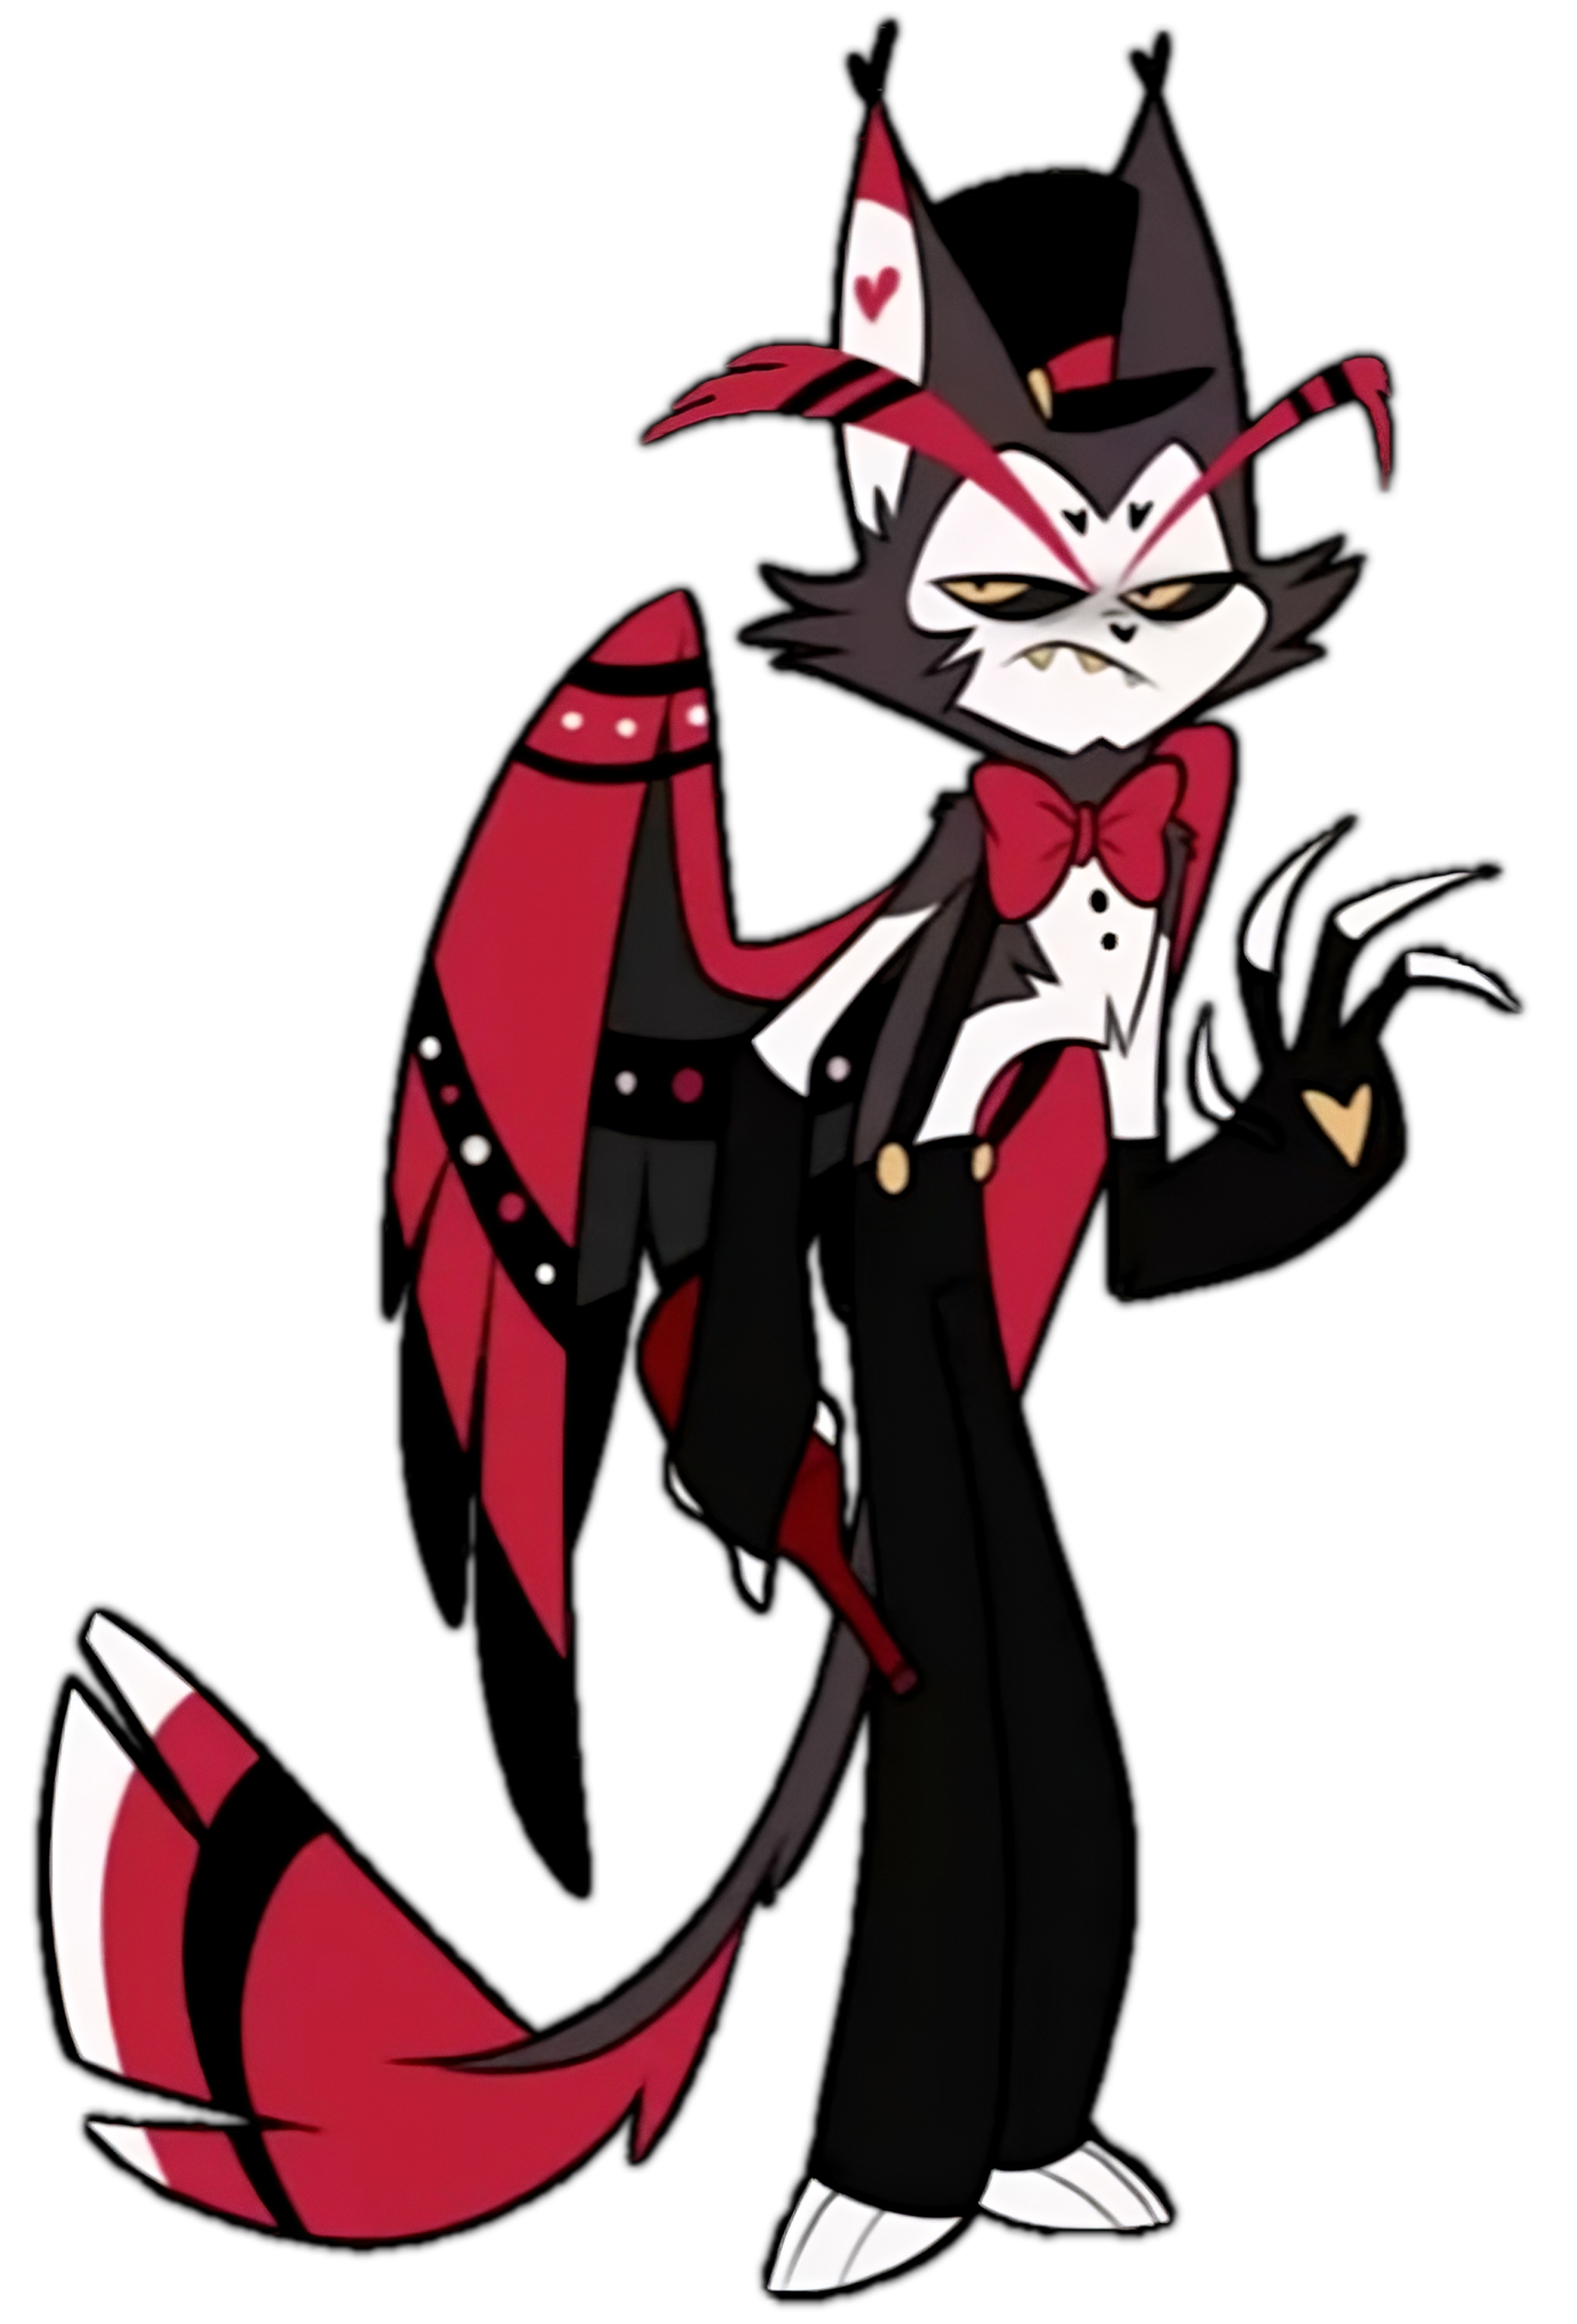 https://static.wikia.nocookie.net/hazbin-hotel-journey-to-the-light/images/f/f7/Husk_New_Design_by_A24.png/revision/latest?cb=20240209175326